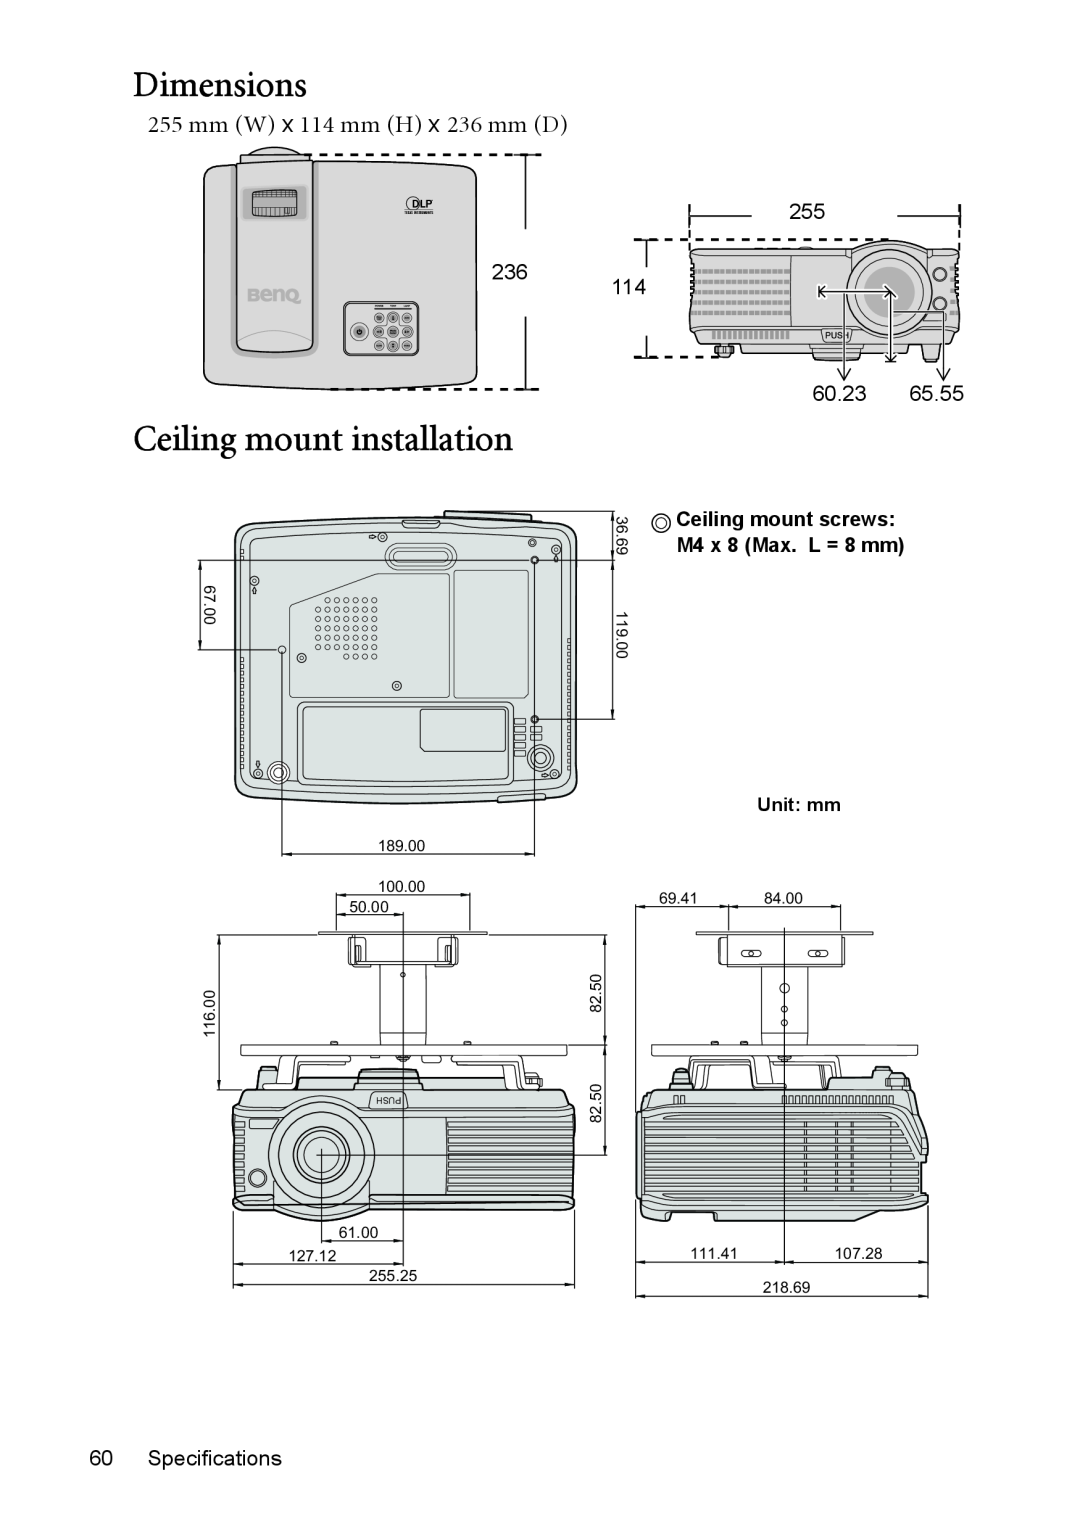 BenQ MP525 ST user manual Dimensions, Ceiling mount installation, mm W x 114 mm H x 236 mm D 